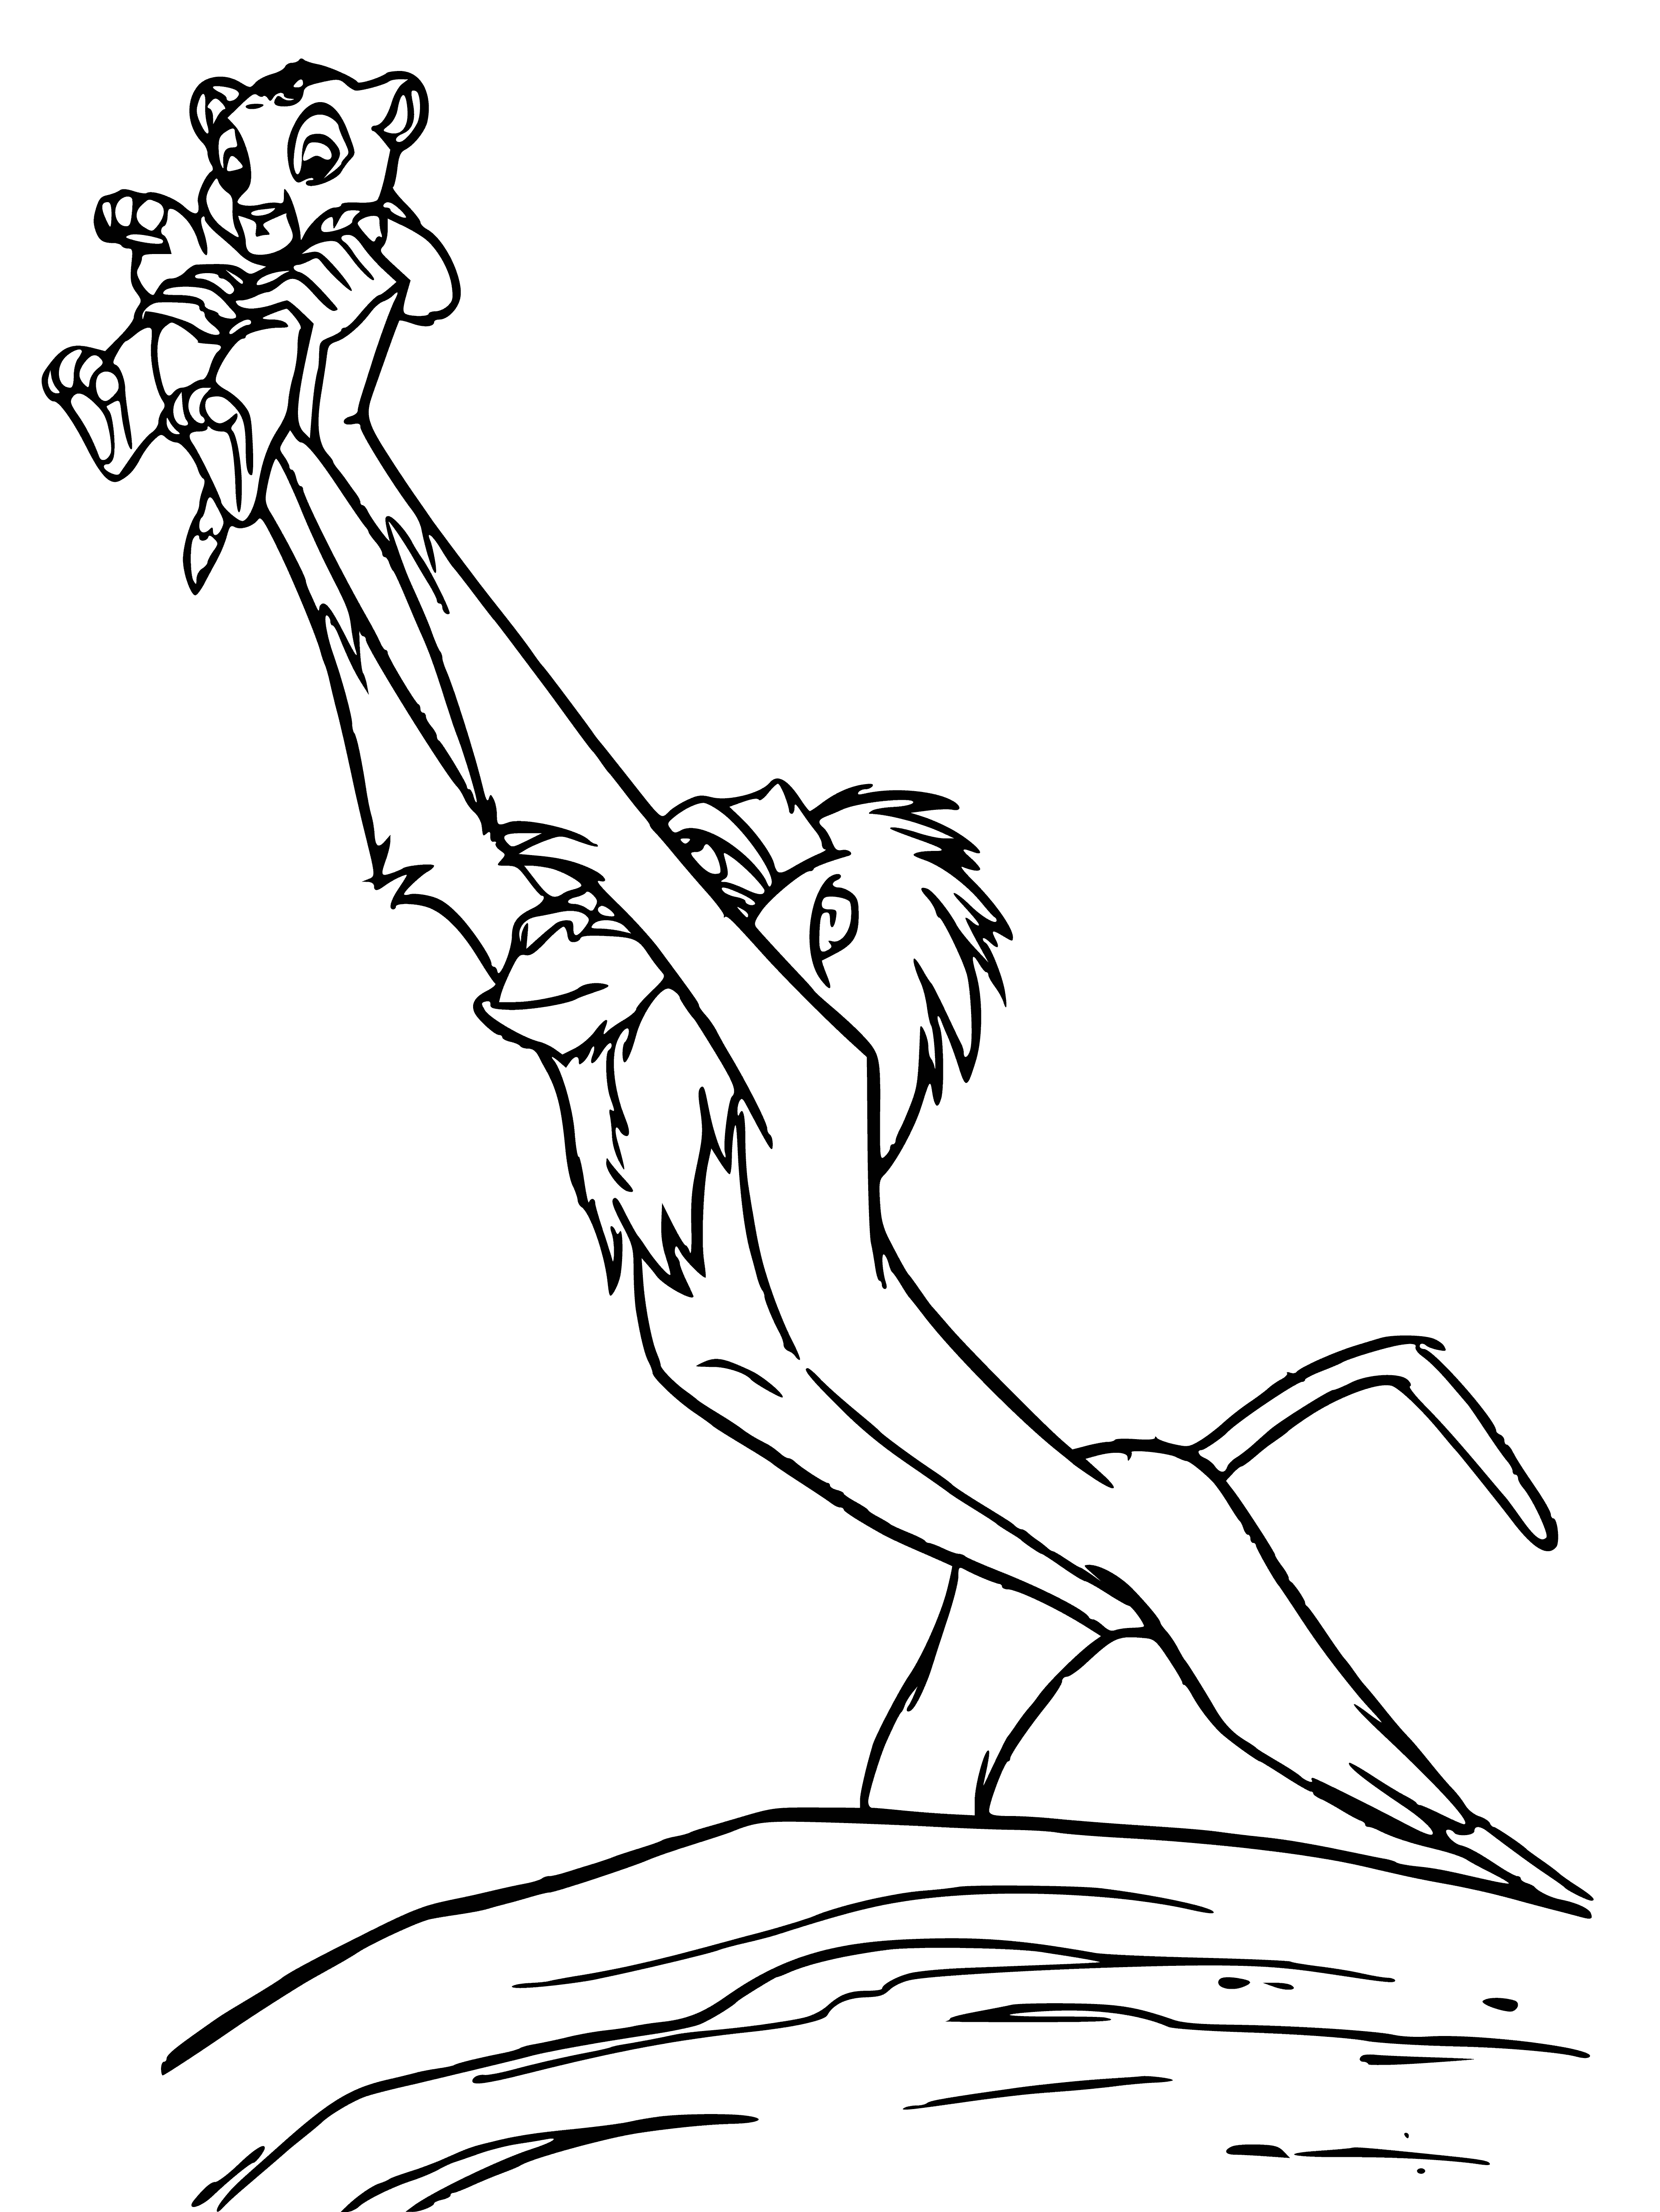 coloring page: Mama lion licks her content cub, his eyes closed in peaceful bliss.